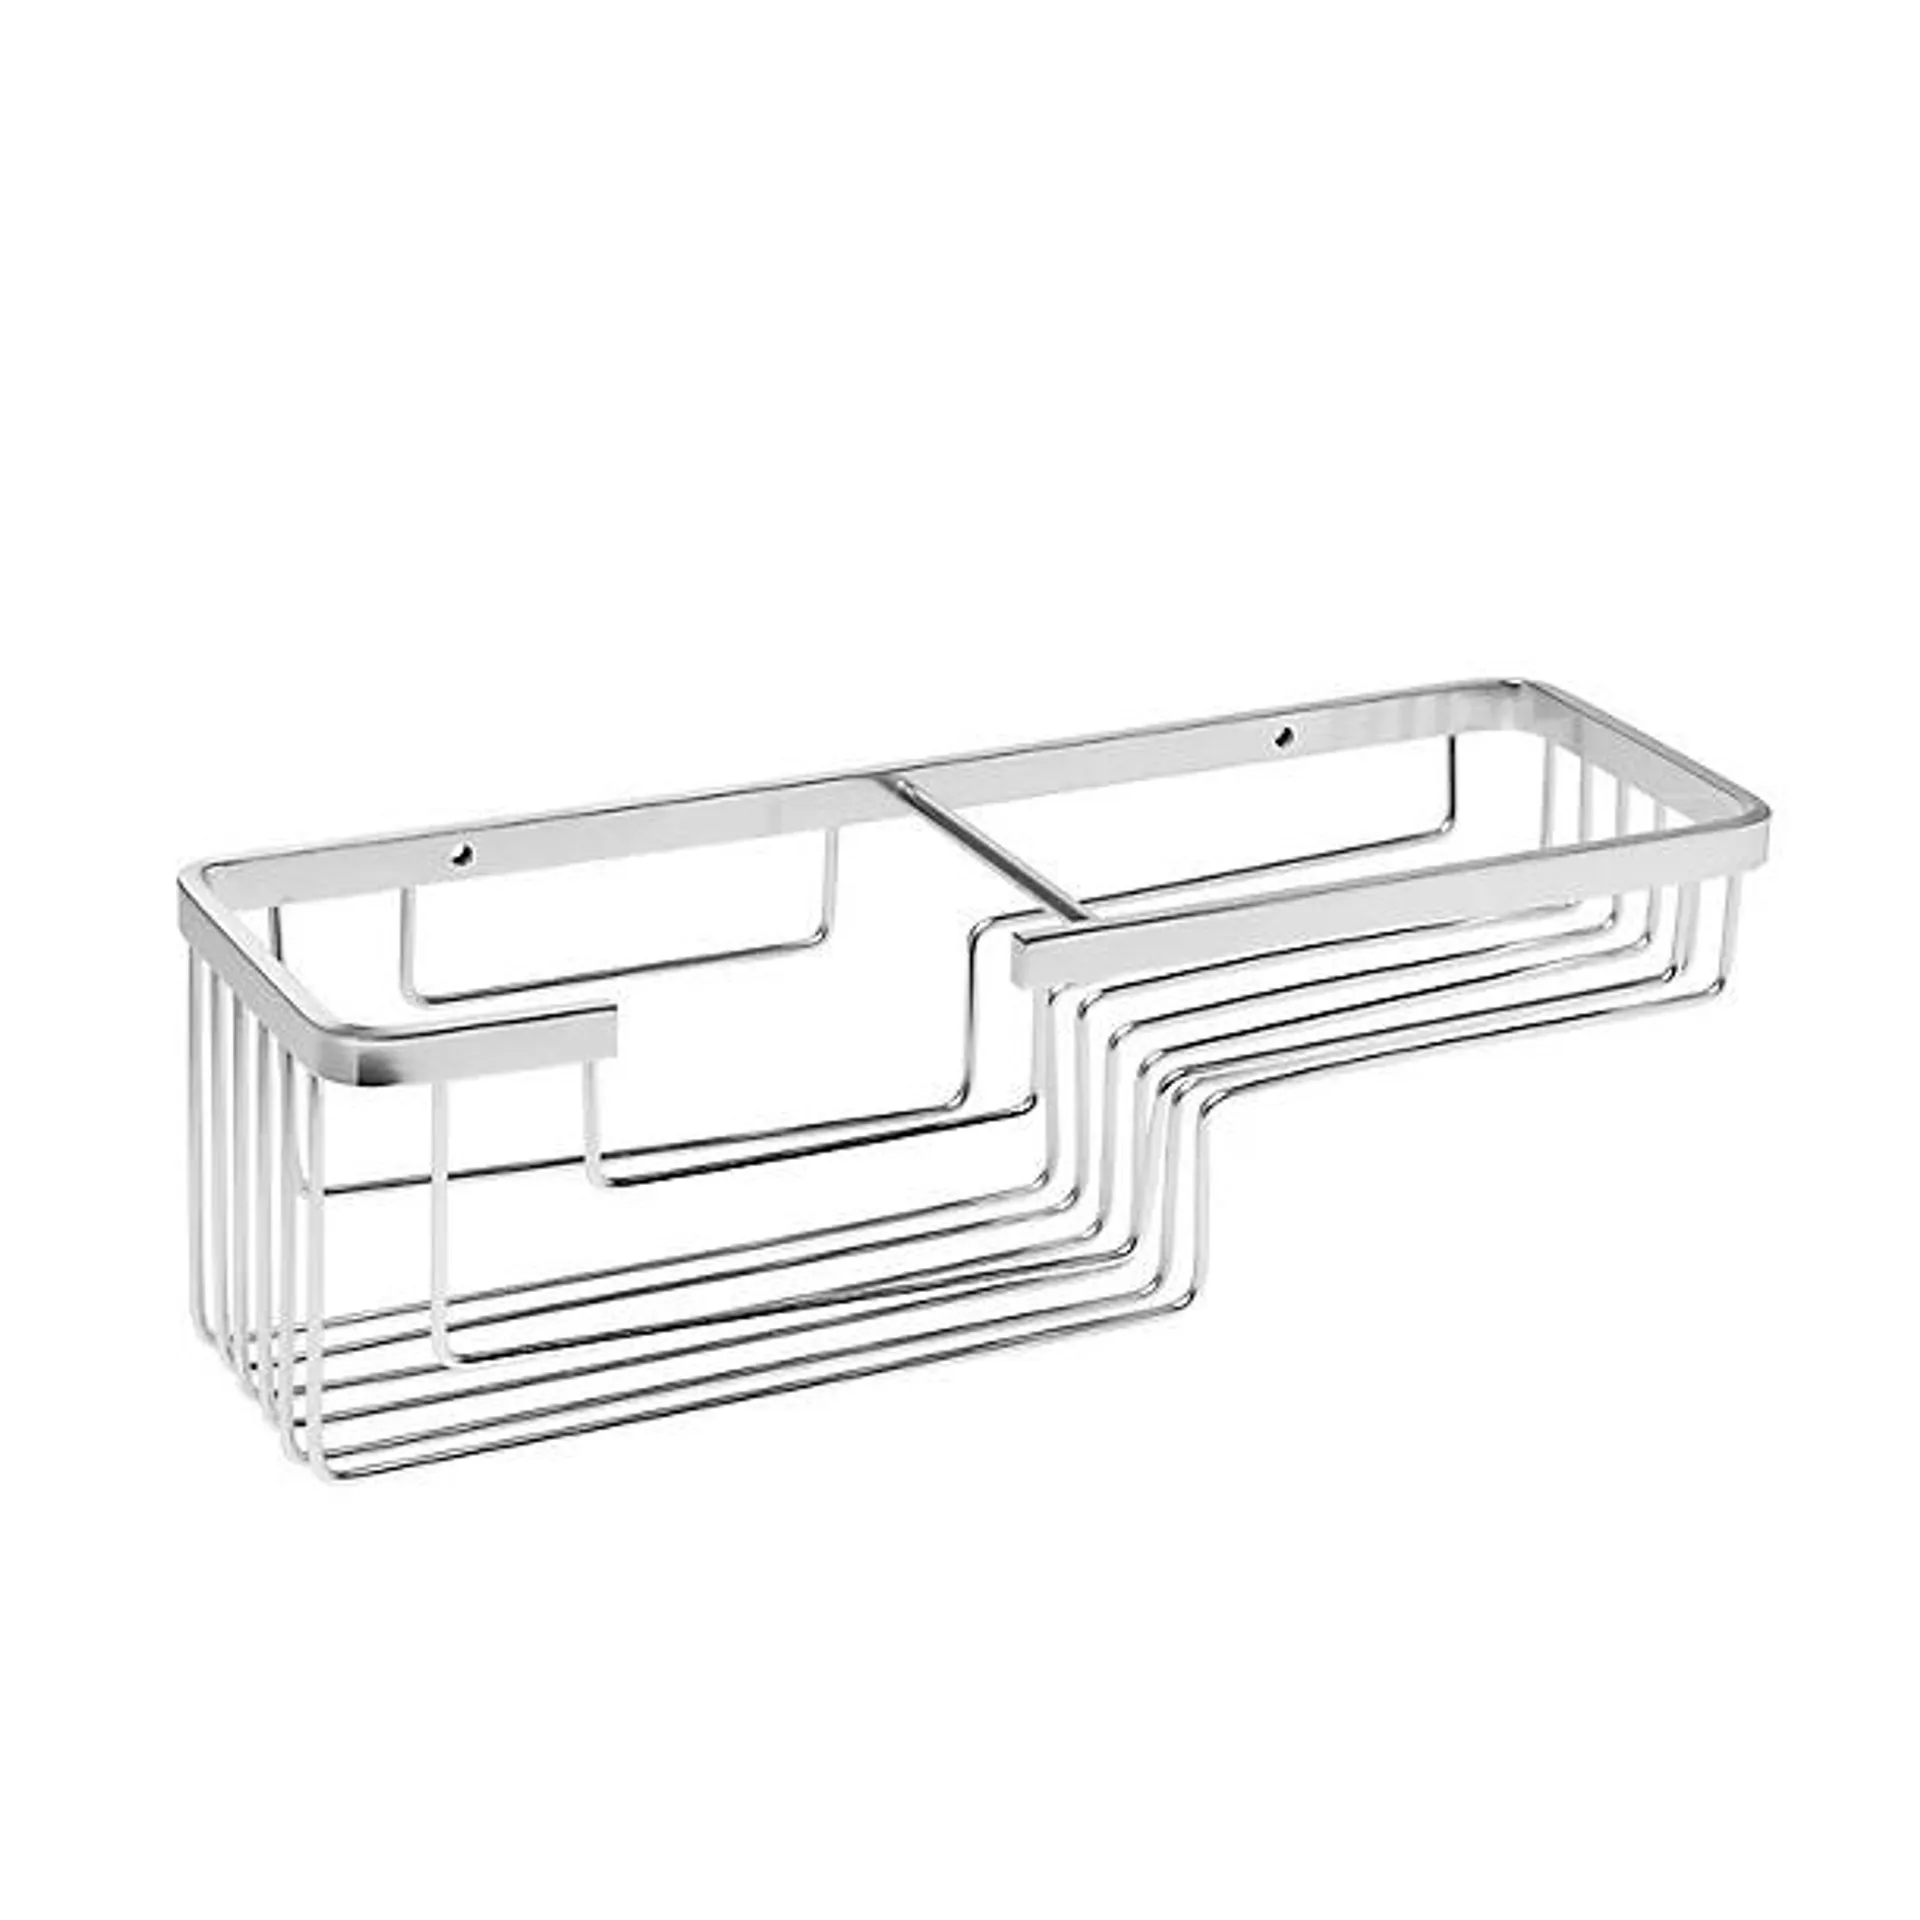 Tatay Ice Collection Aluminium Stepped Shower Caddy